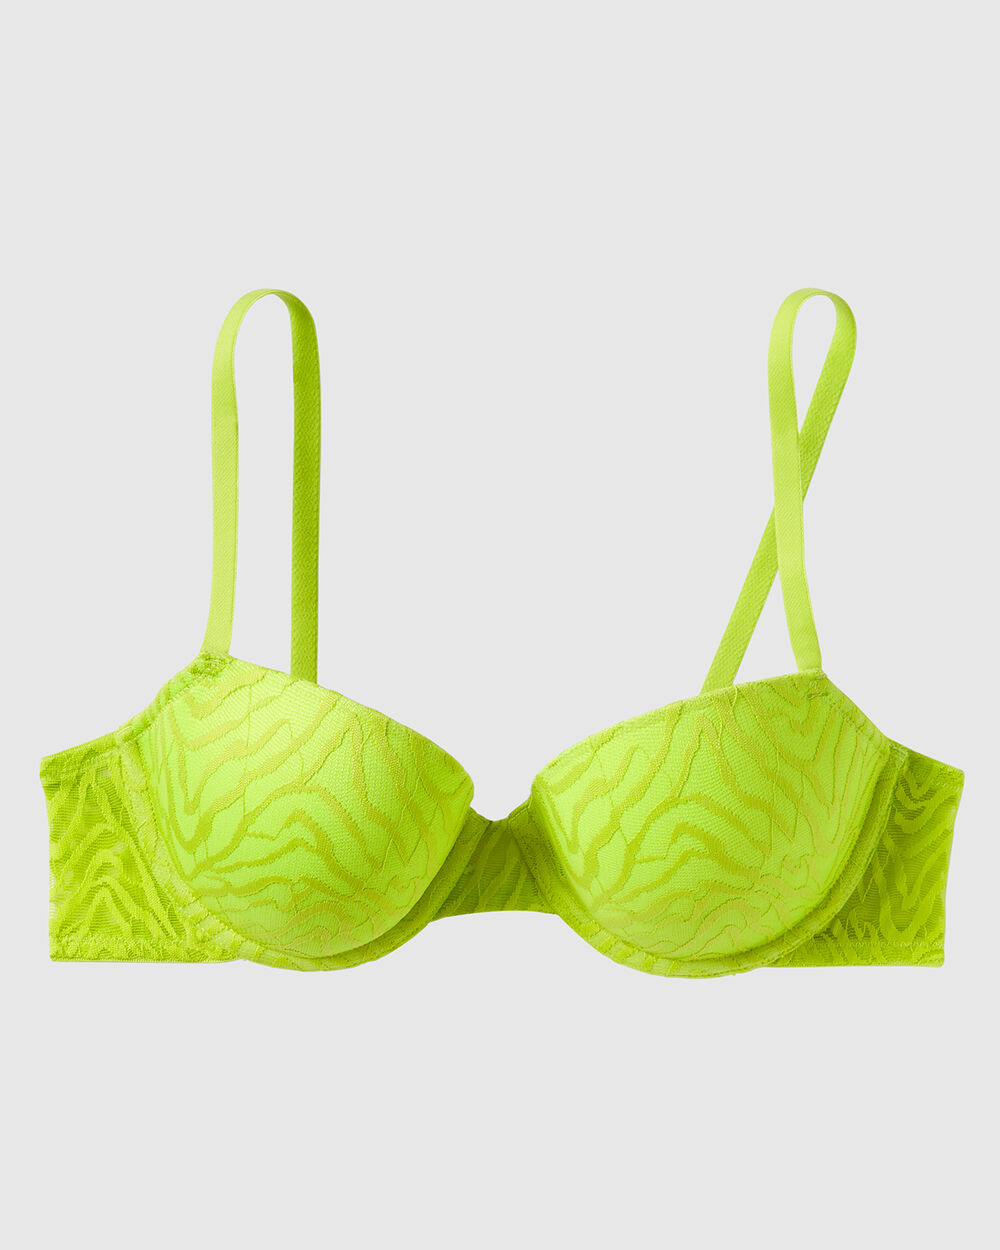 Neon Yellow Panty by PINK Victoria's Secret